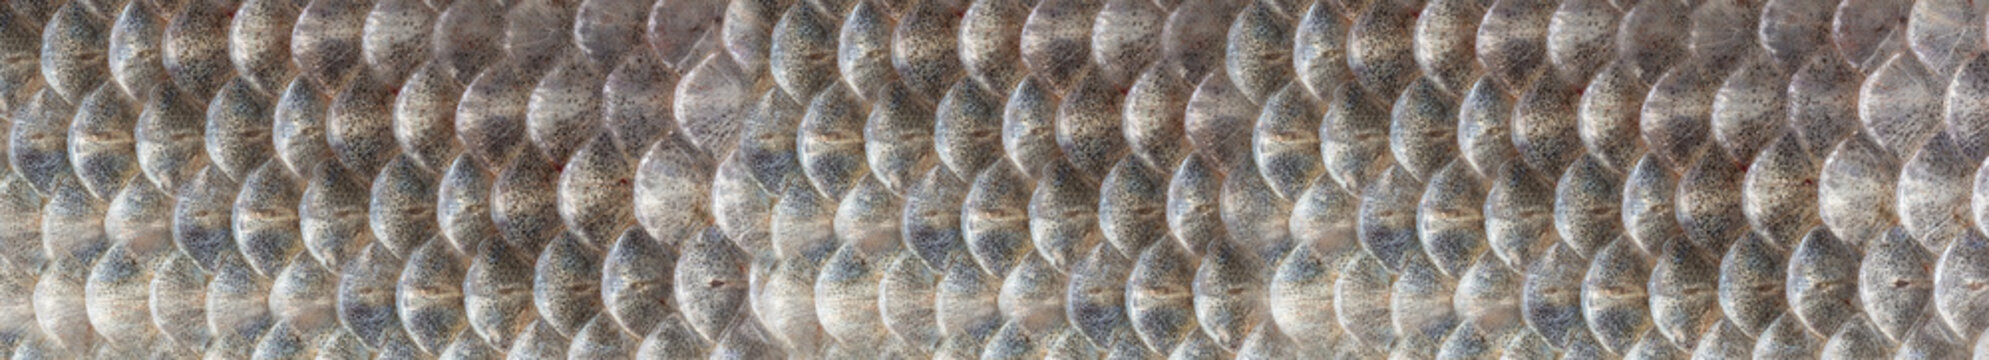 texture of fish scales close-up